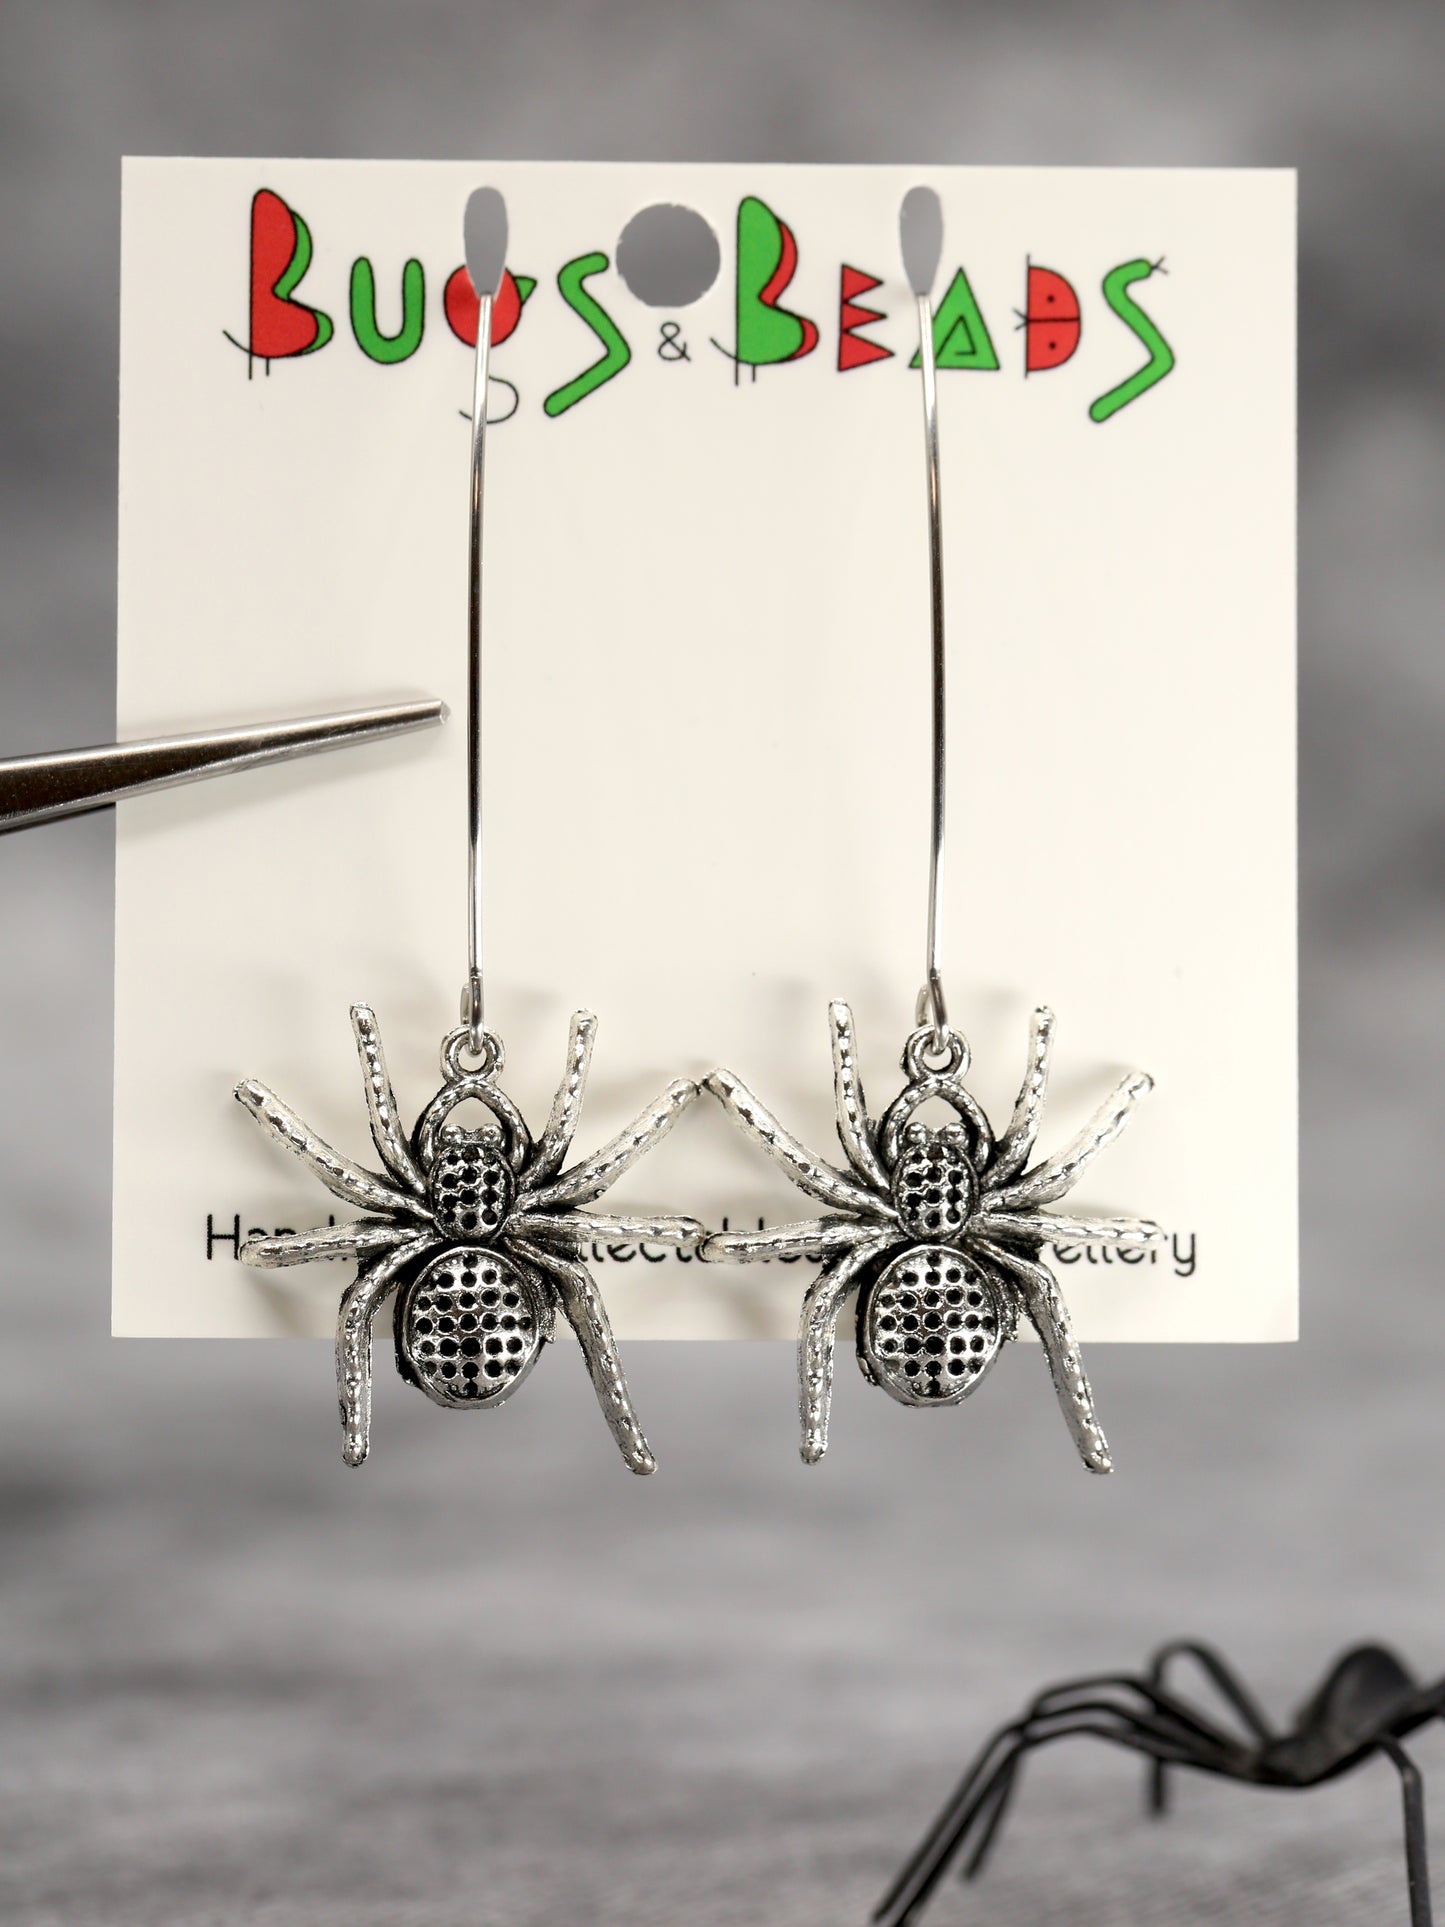 Dotted spider earrings